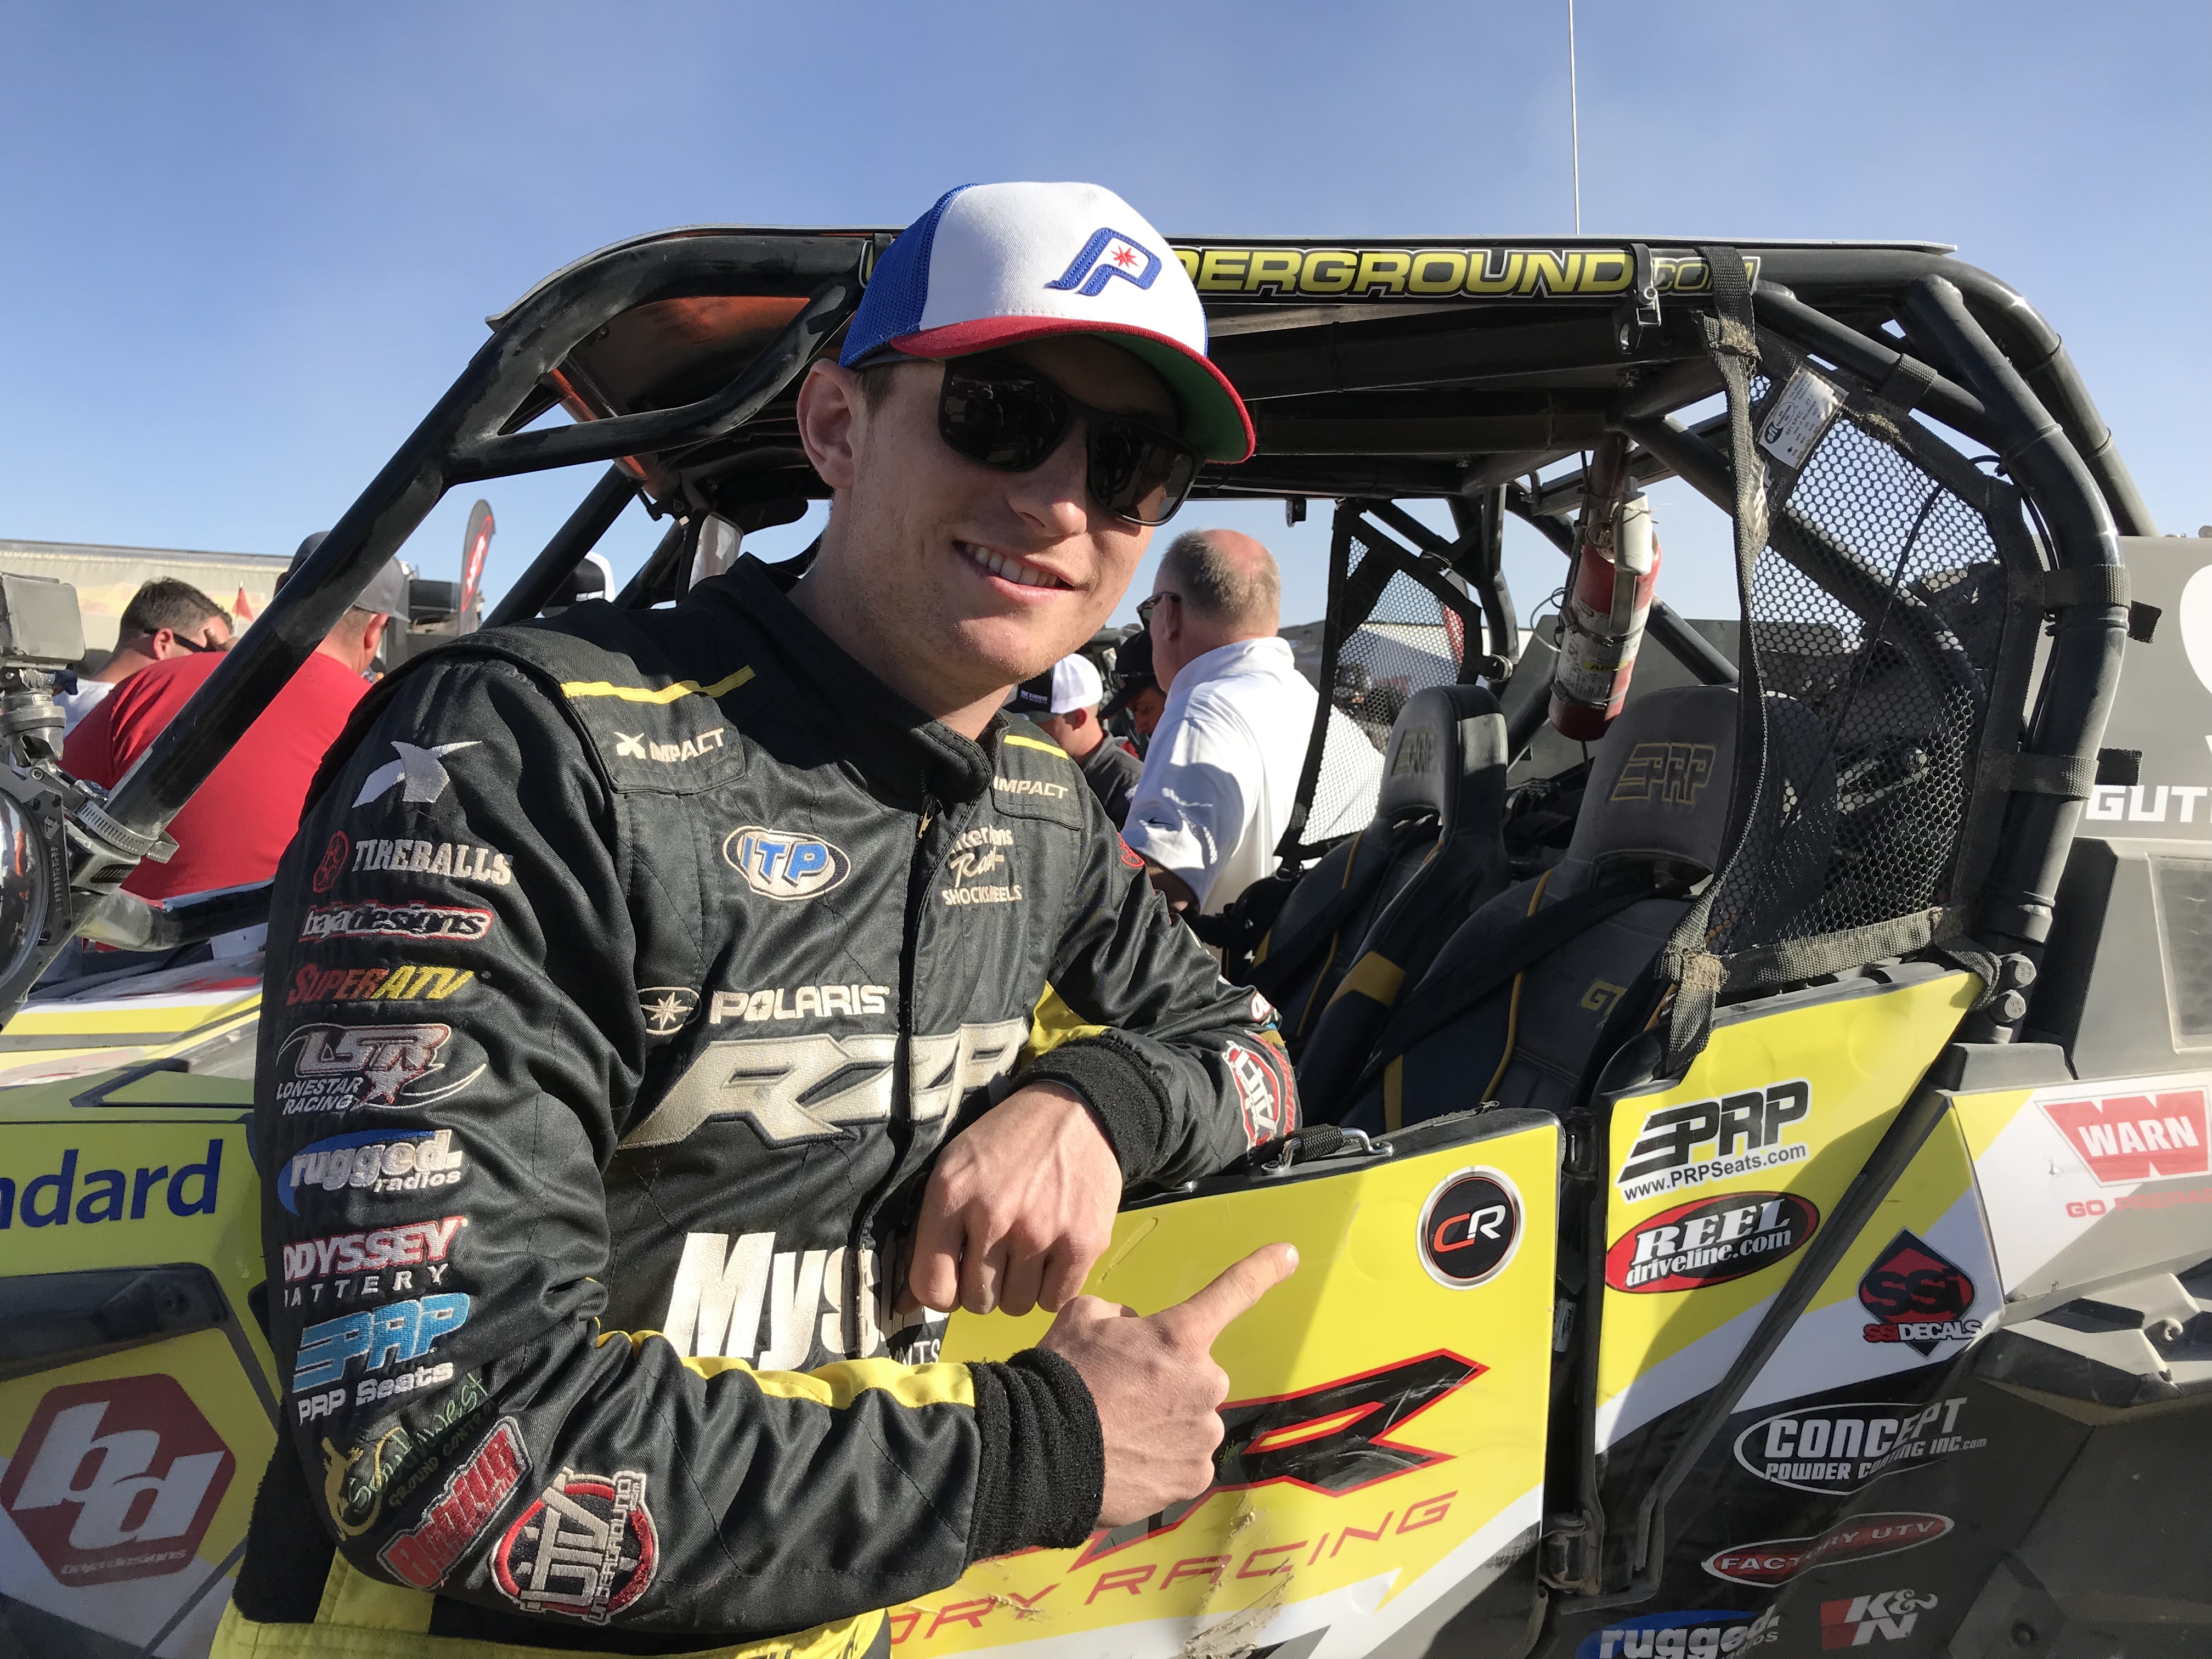 Polaris Factory Racing athlete Mitch Guthrie Jr. picks up first career King of the Hammers win, defeating his father and six-time event champion, Mitch Guthrie Sr. | Photo Credit: Polaris